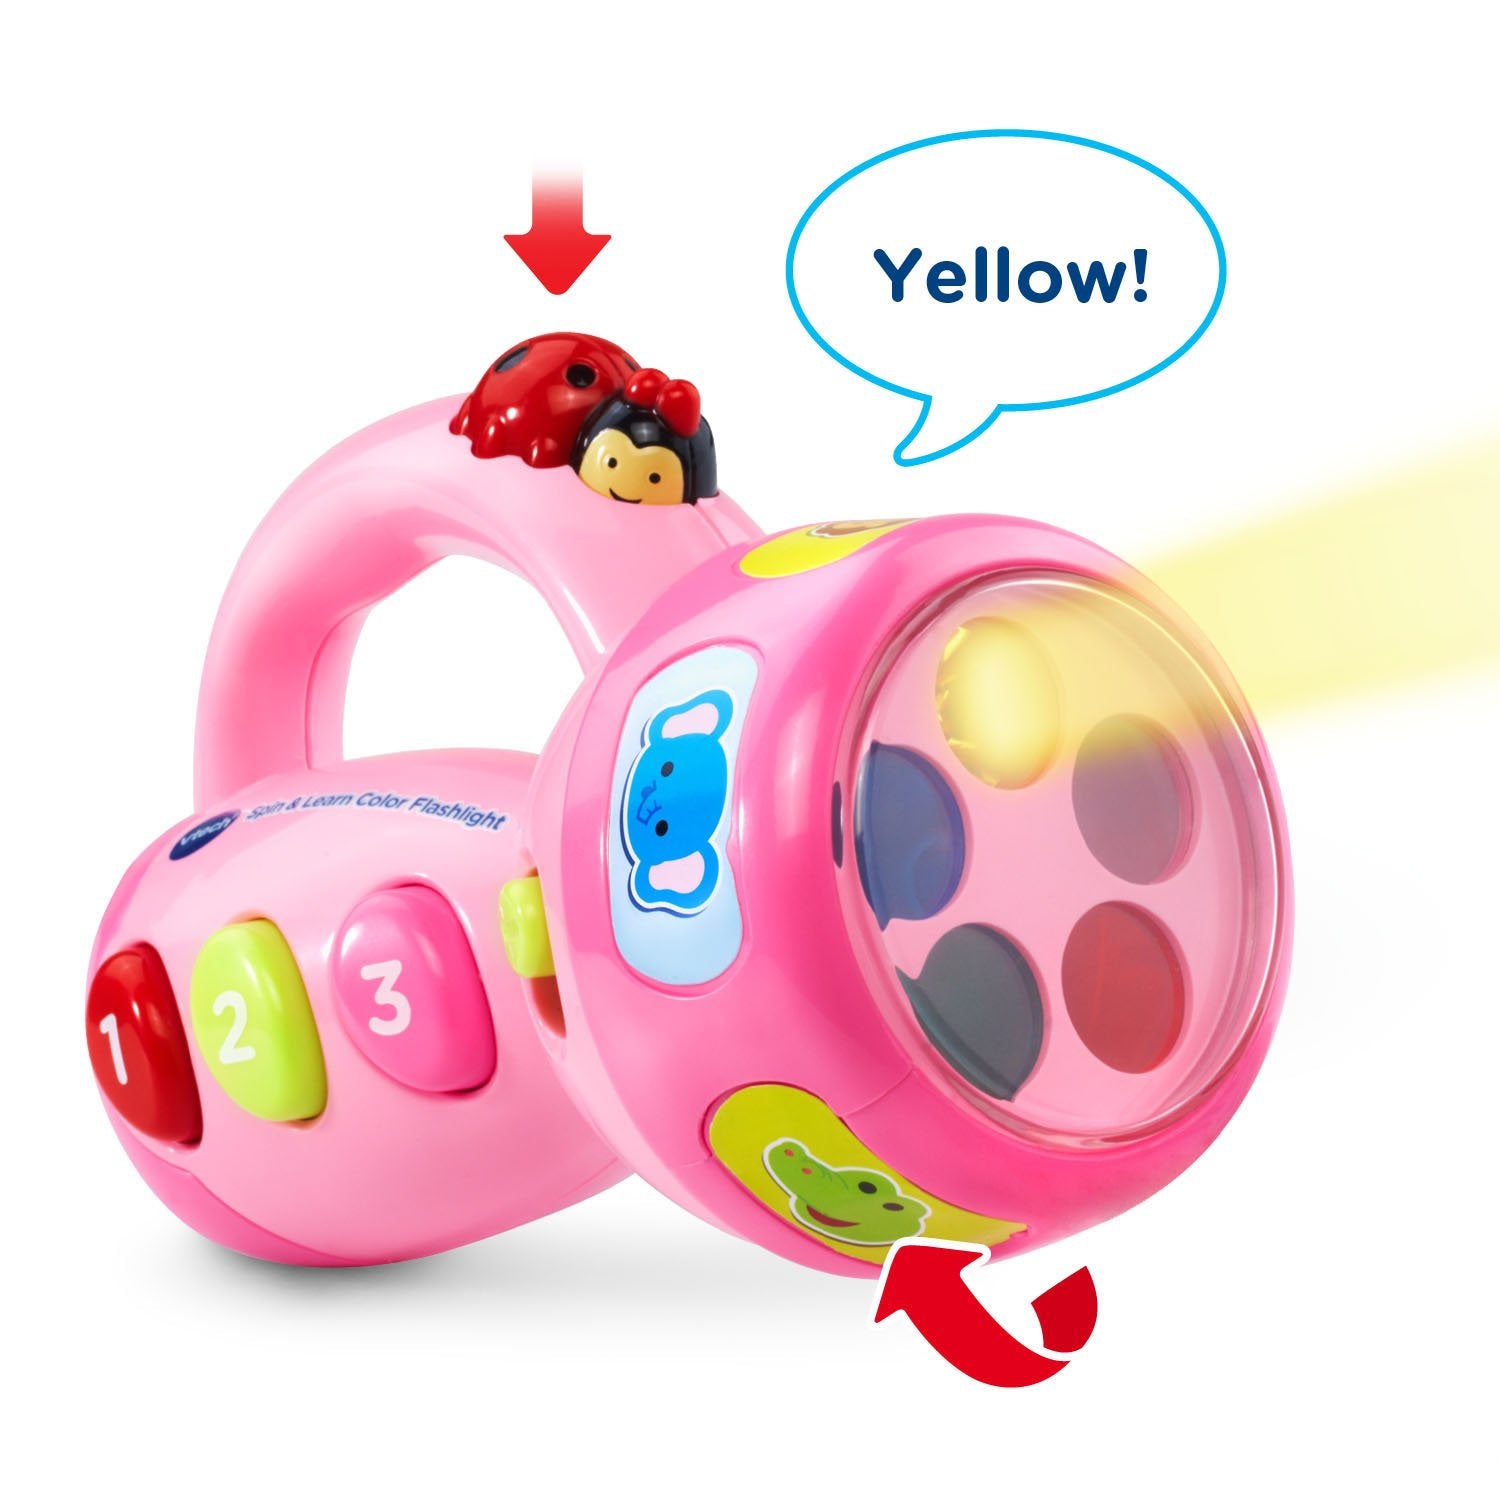 VTech Spin and Learn Color Flashlight Amazon Exclusive, Pink